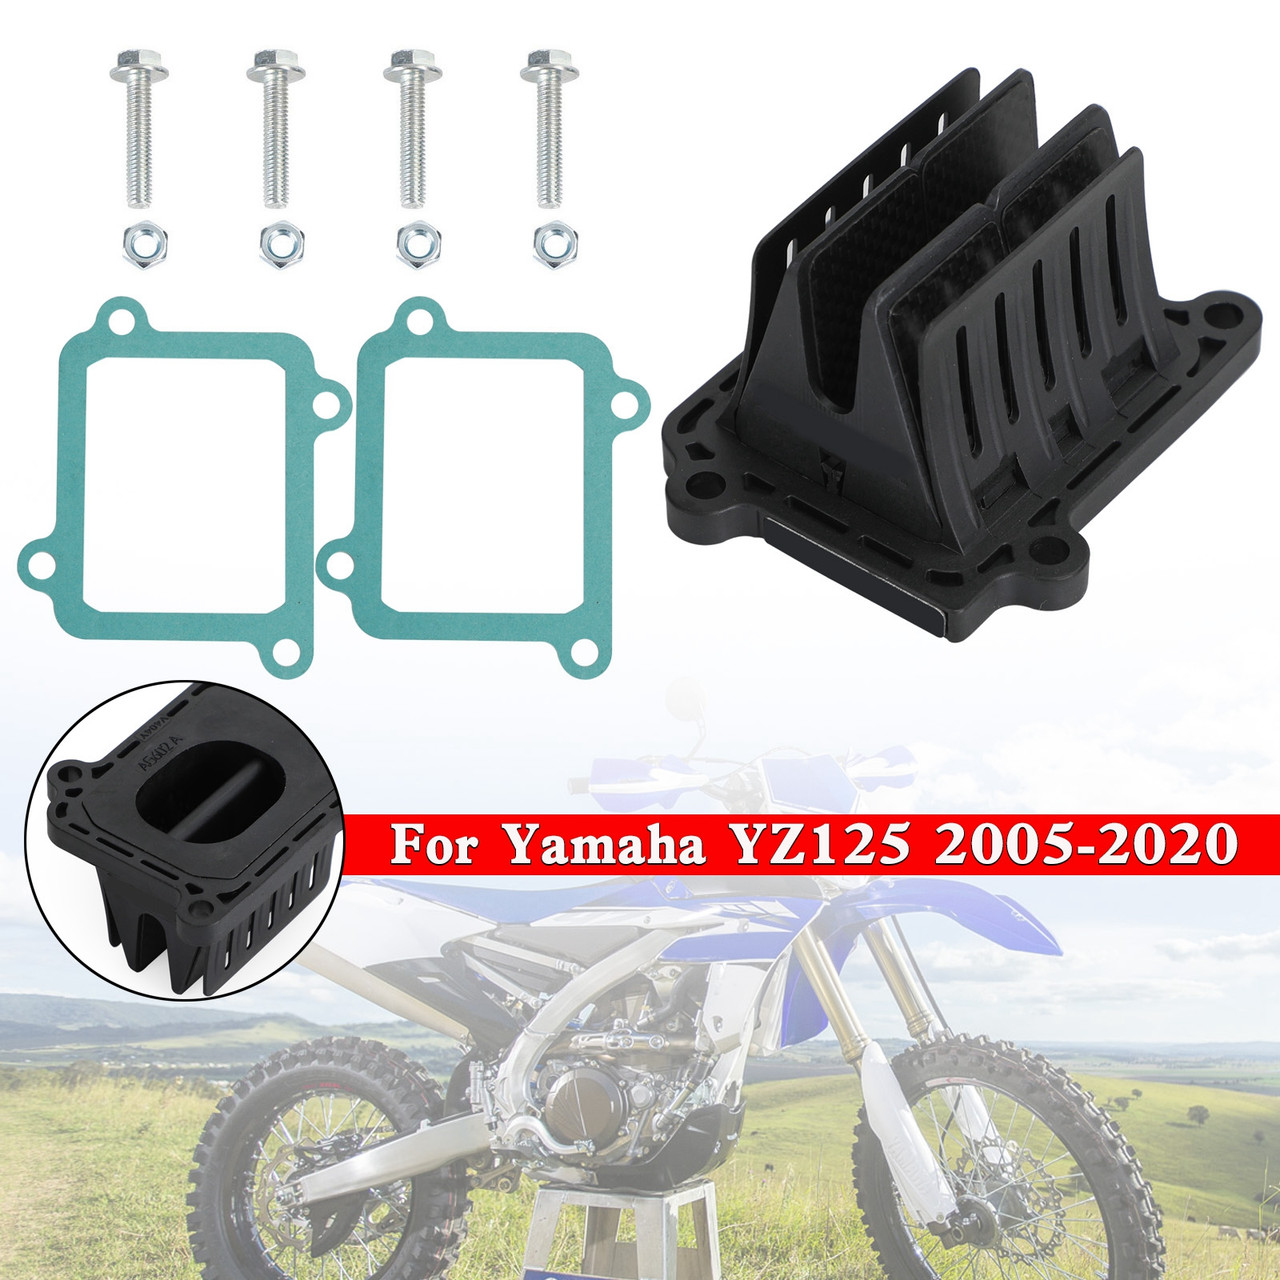 V4R04 Reed Valve Cage Block For Yamaha YZ125 2005-2020